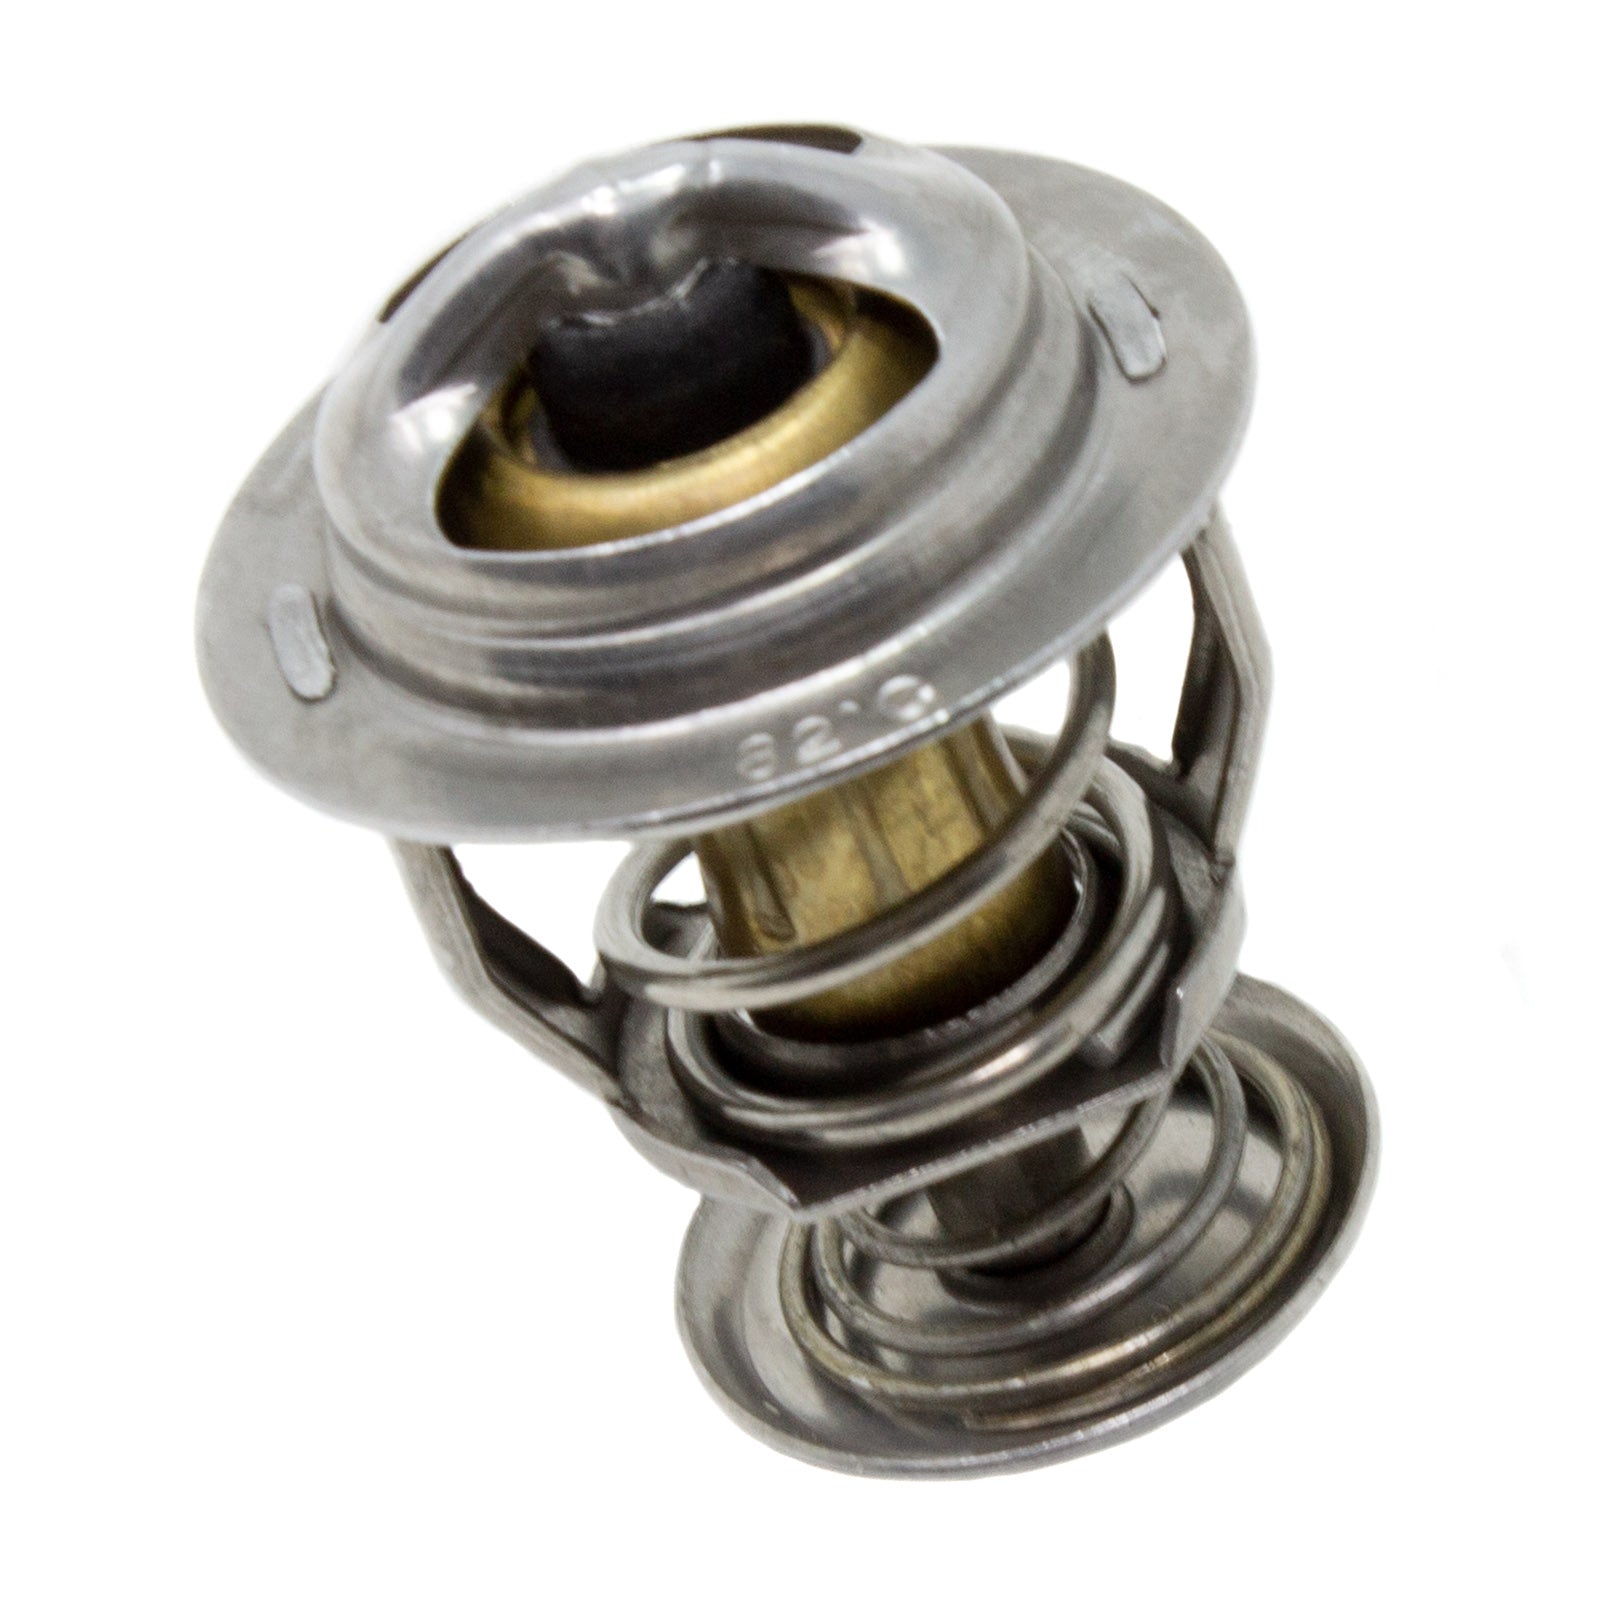 Duraforce 6685520, Thermostat For Bobcat